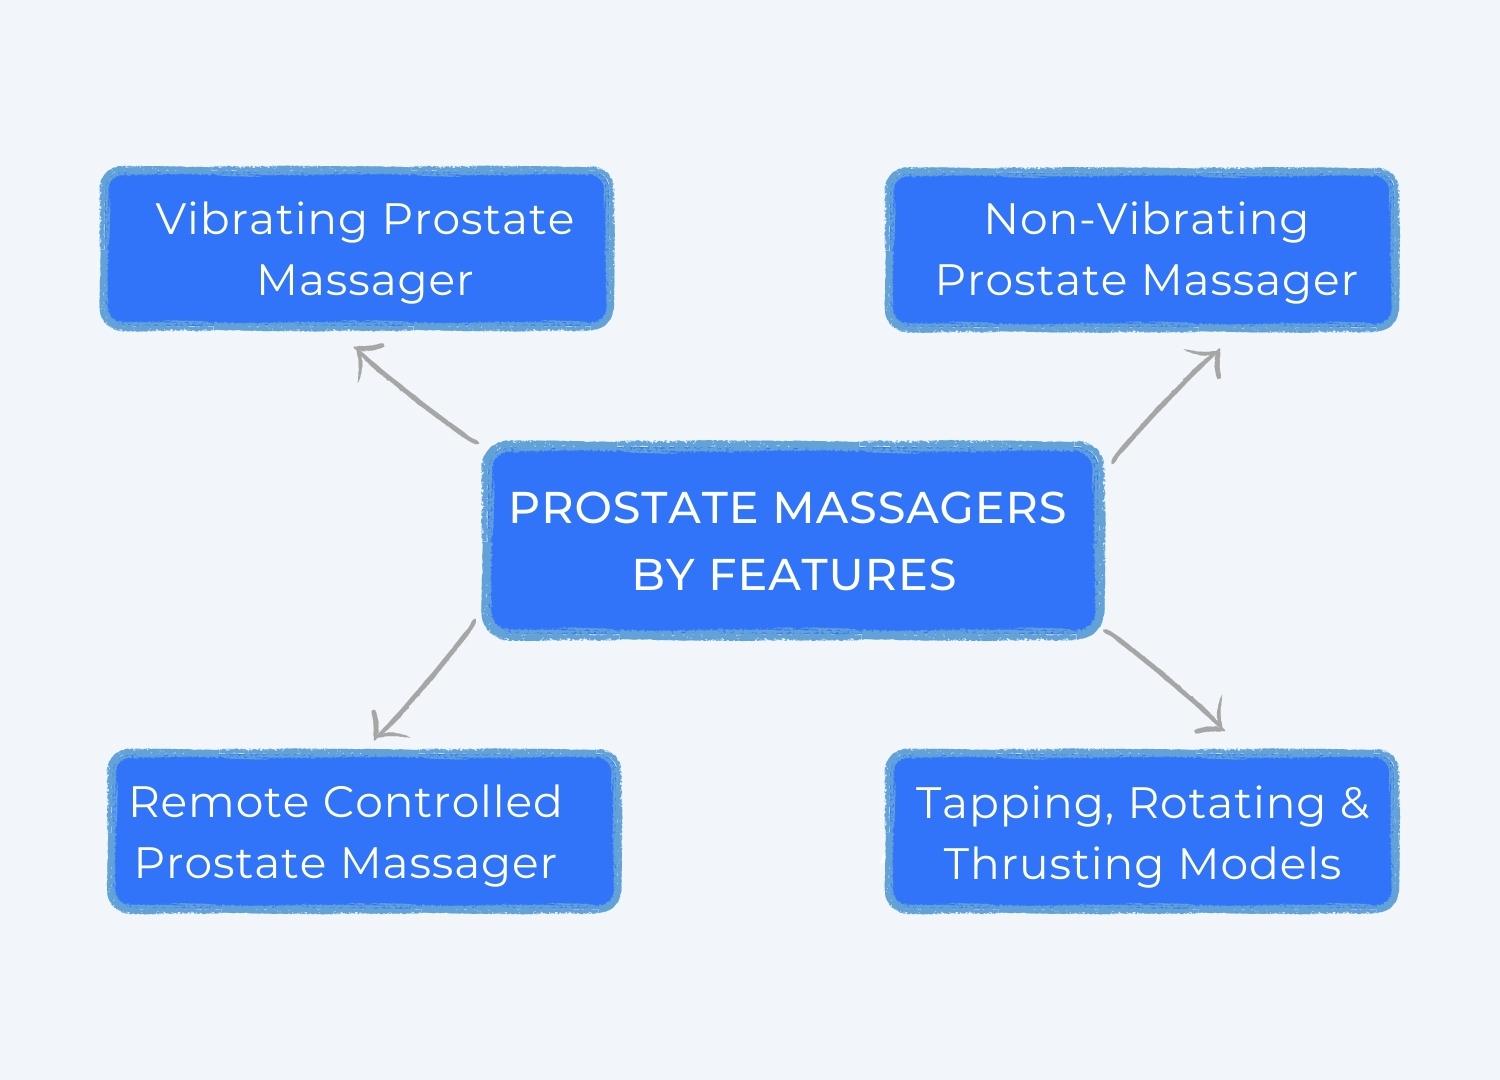 Diagram of the Prostate Massagers By Features